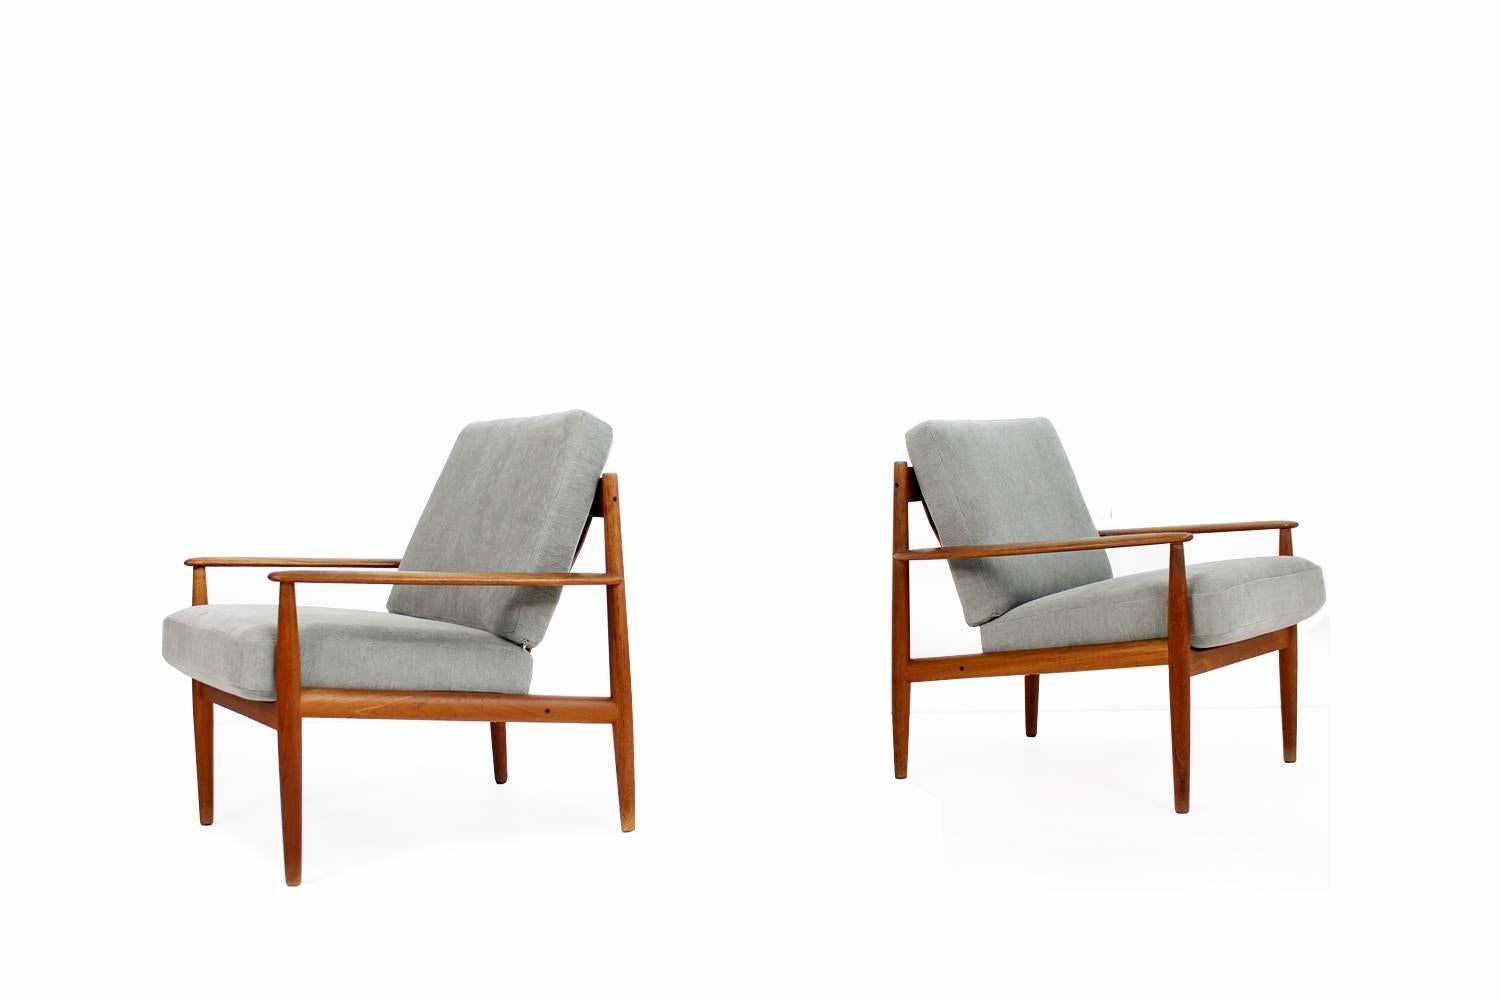 Beautiful set of two Grete Jalk teak easy chairs, Danish modern design. Original innerspring cushions, reupholstered and covered with smooth woven fabric in a beautiful grey. Produced by France & Son Denmark.
Matching daybed in same fabric